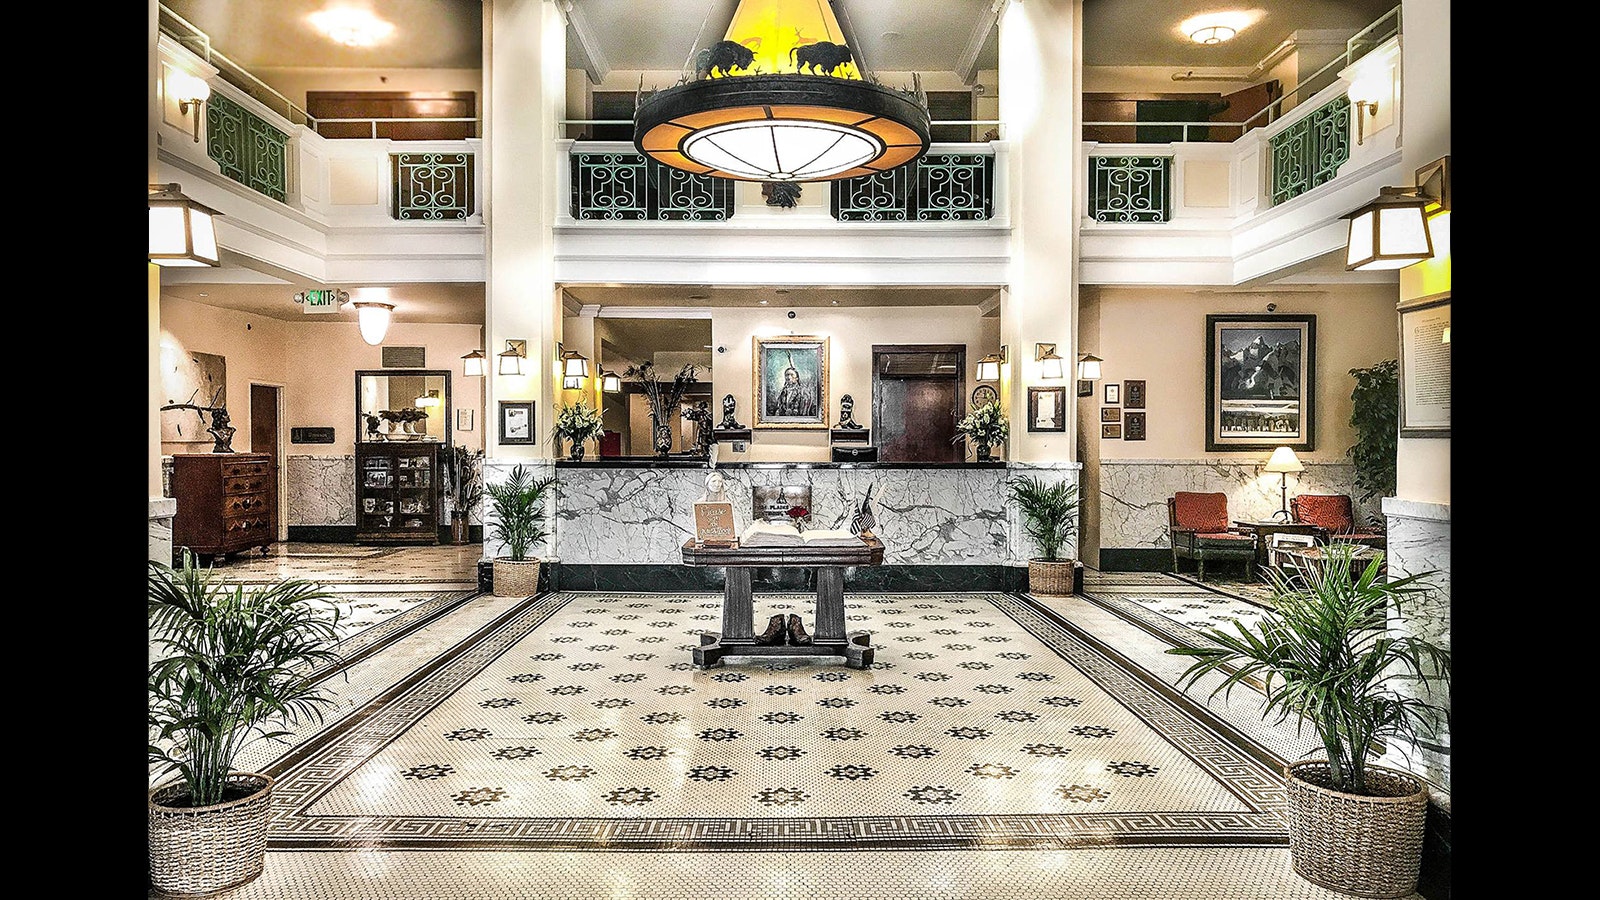 The lobby at the historic Plains Hotel in Cheyenne is impressive.